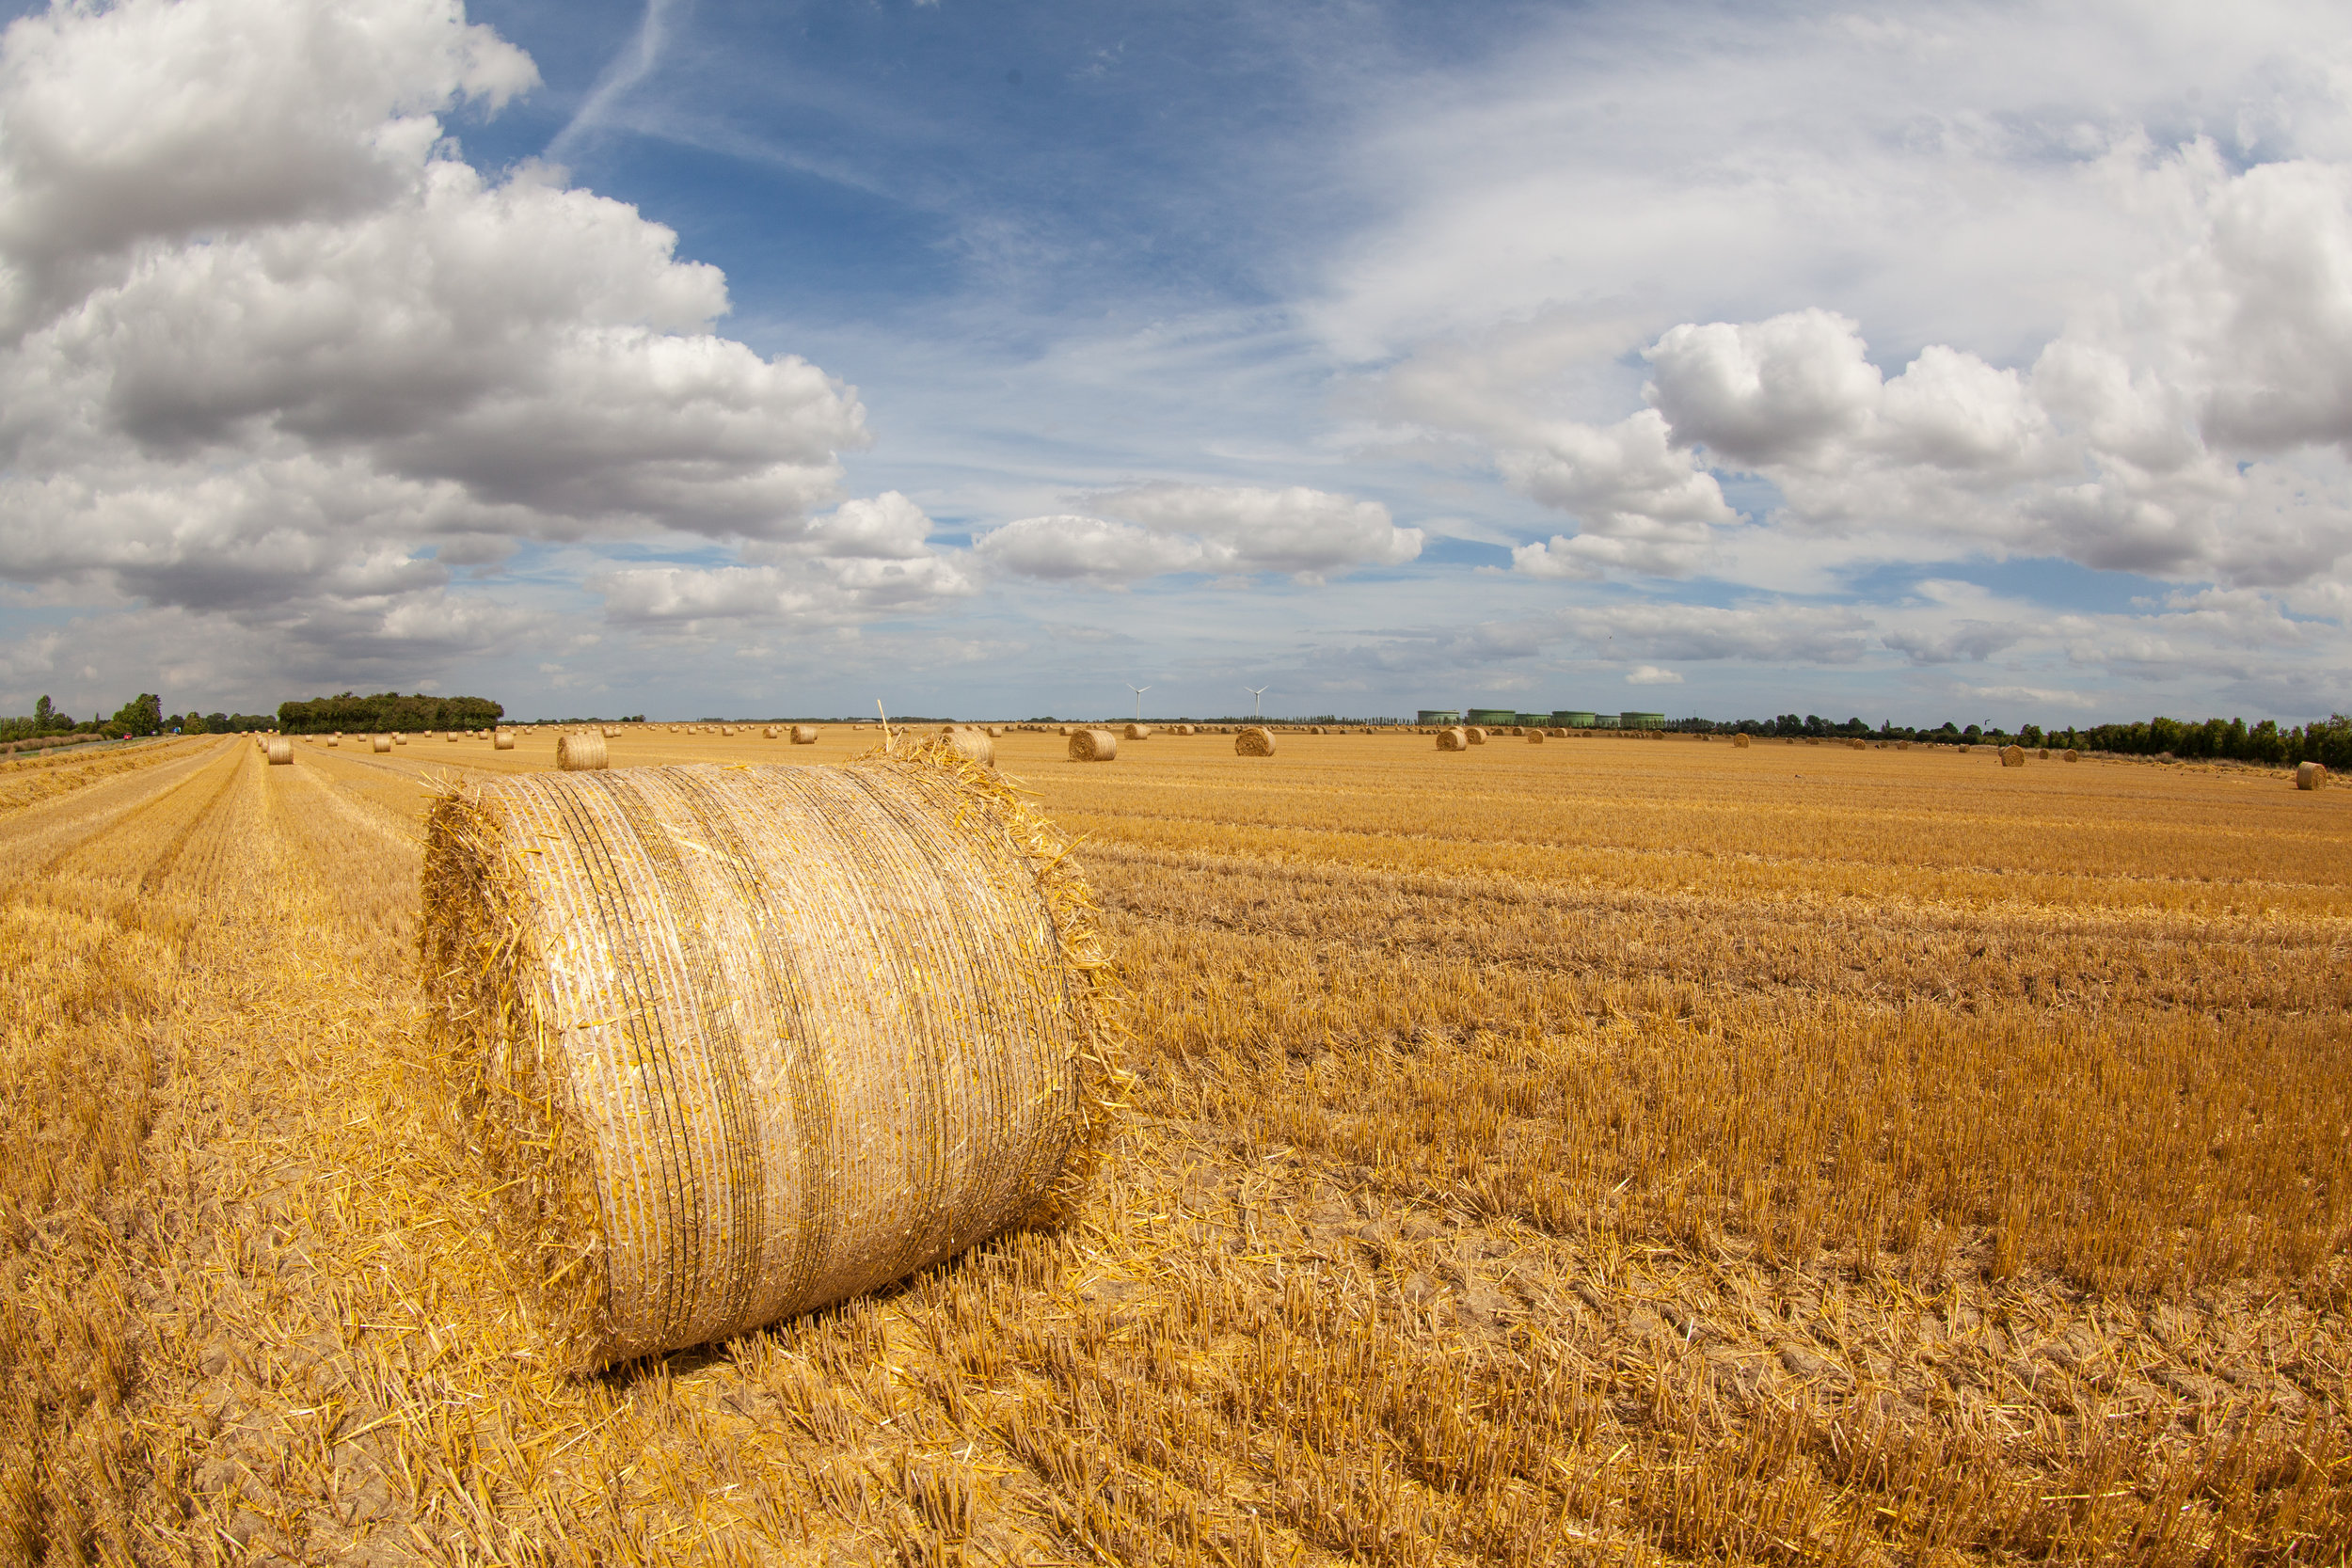 Hay bails in a field, summertime in England.